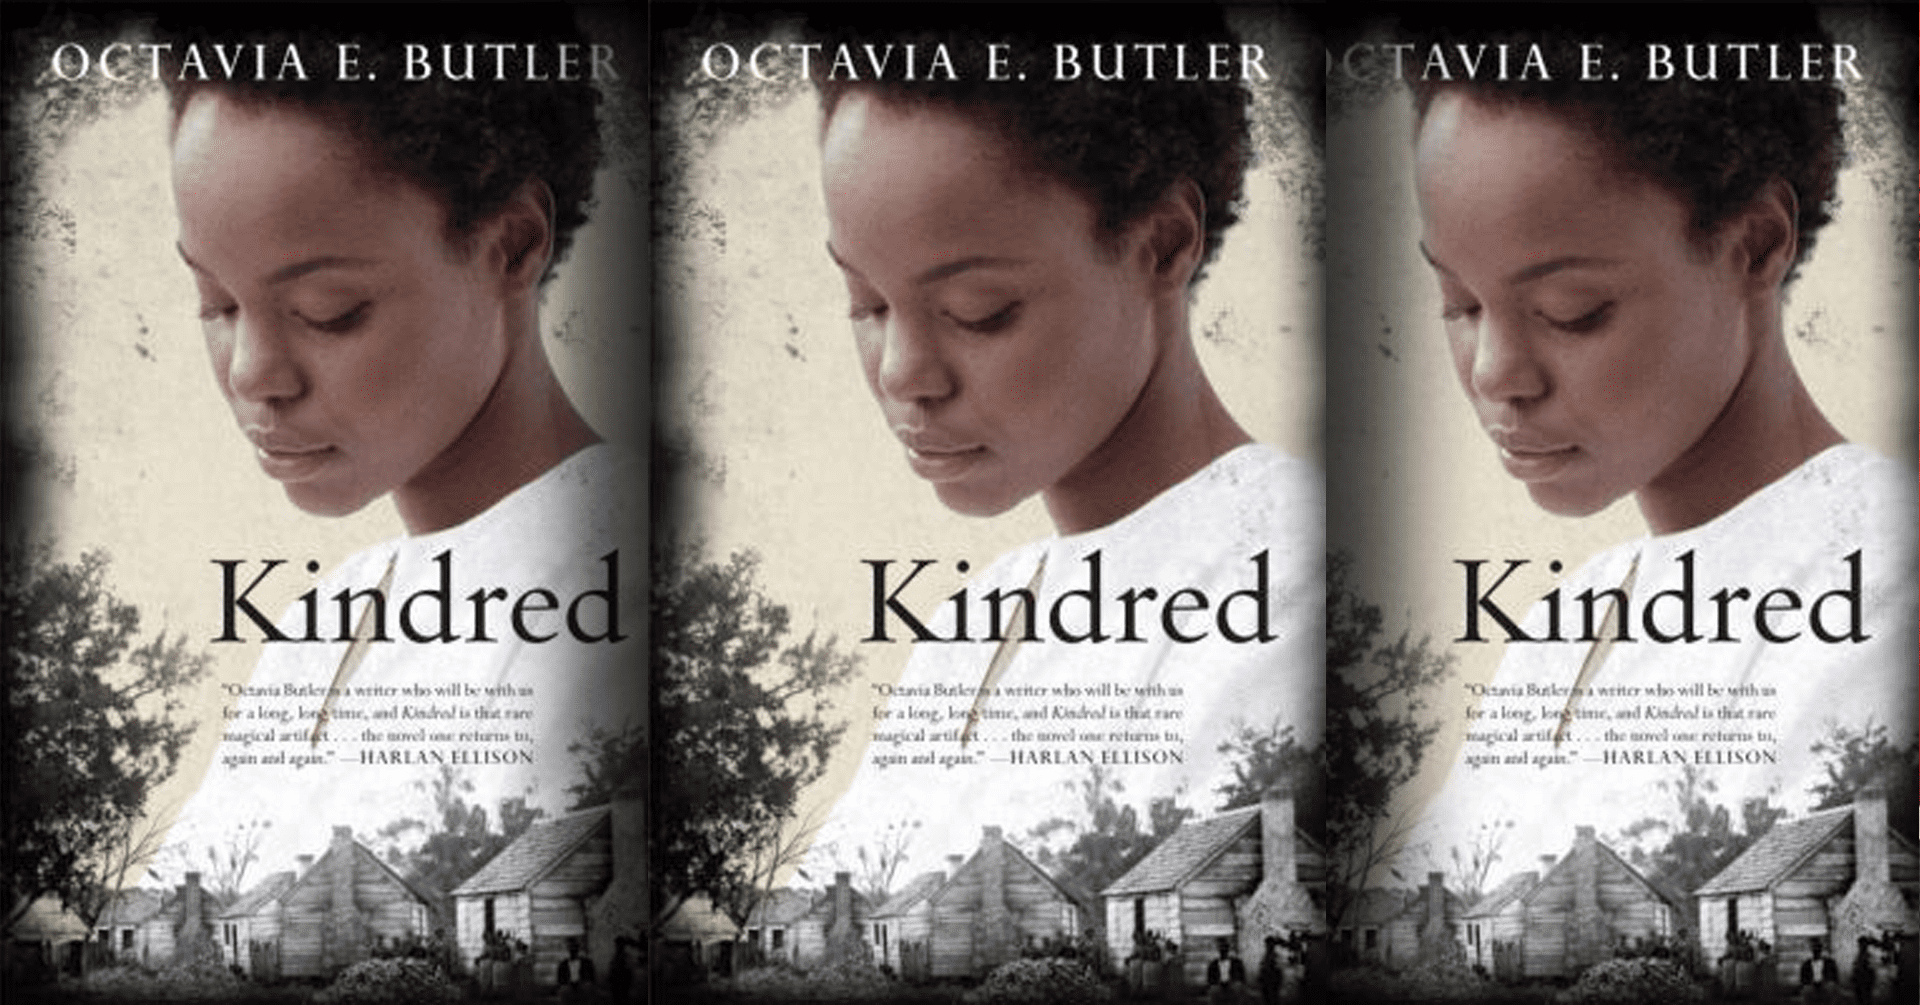 Kindred by Octavia Butler (book cover)